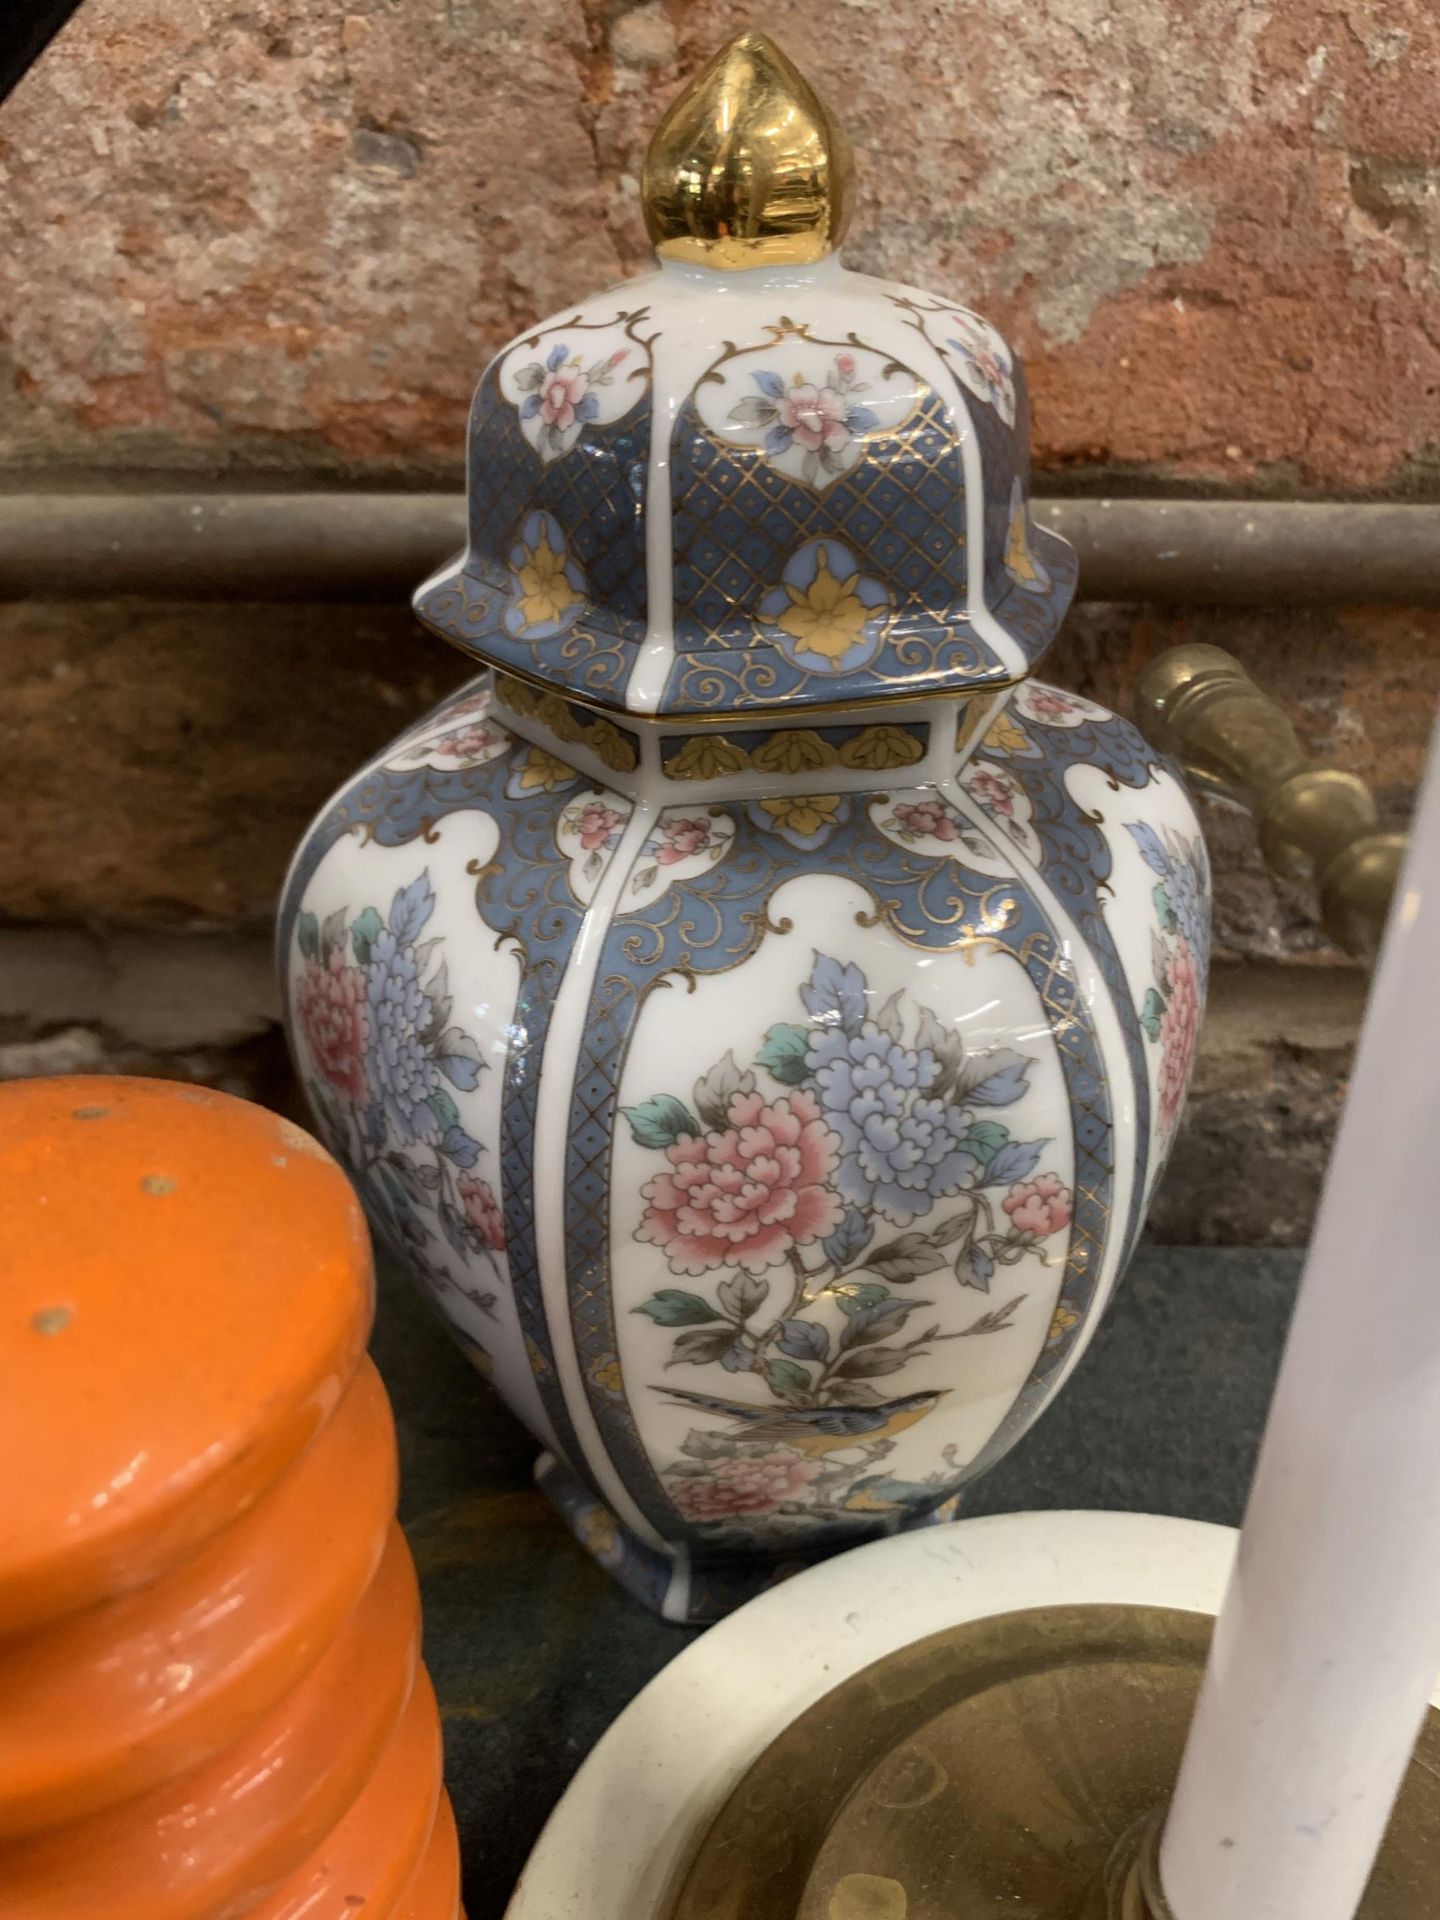 A DENBIGHWARE FLORAL WALL POCKET, ORIENTAL PAINTED EGGS, LIDDED JAR, SILVER PLATED CANDLESTICK, BELL - Image 4 of 4